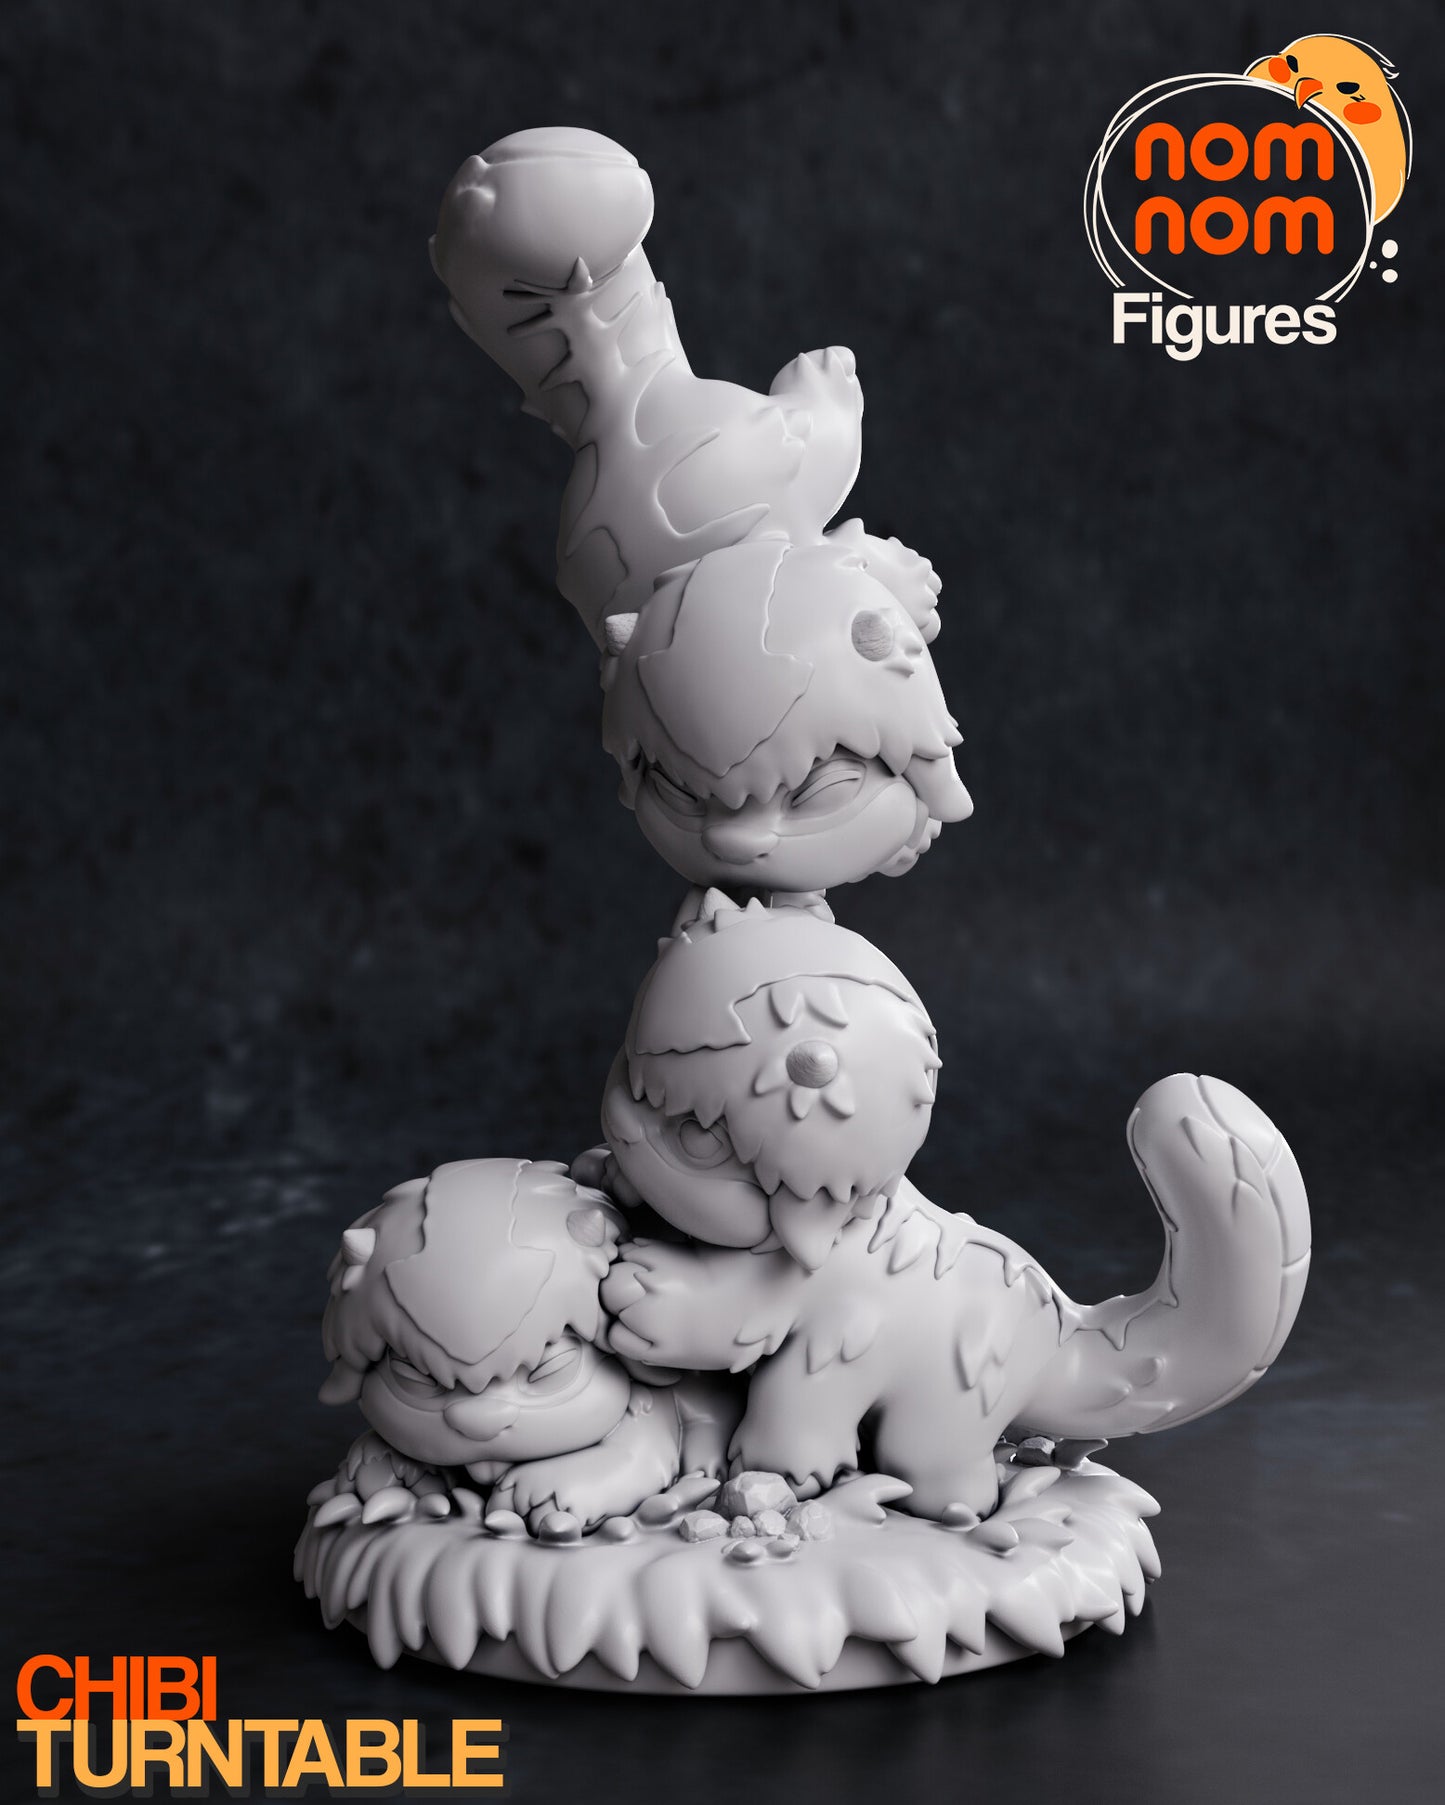 Chibi Baby Skybison - Avatar 3D Printed Fanmade Model by Nomnom Figures